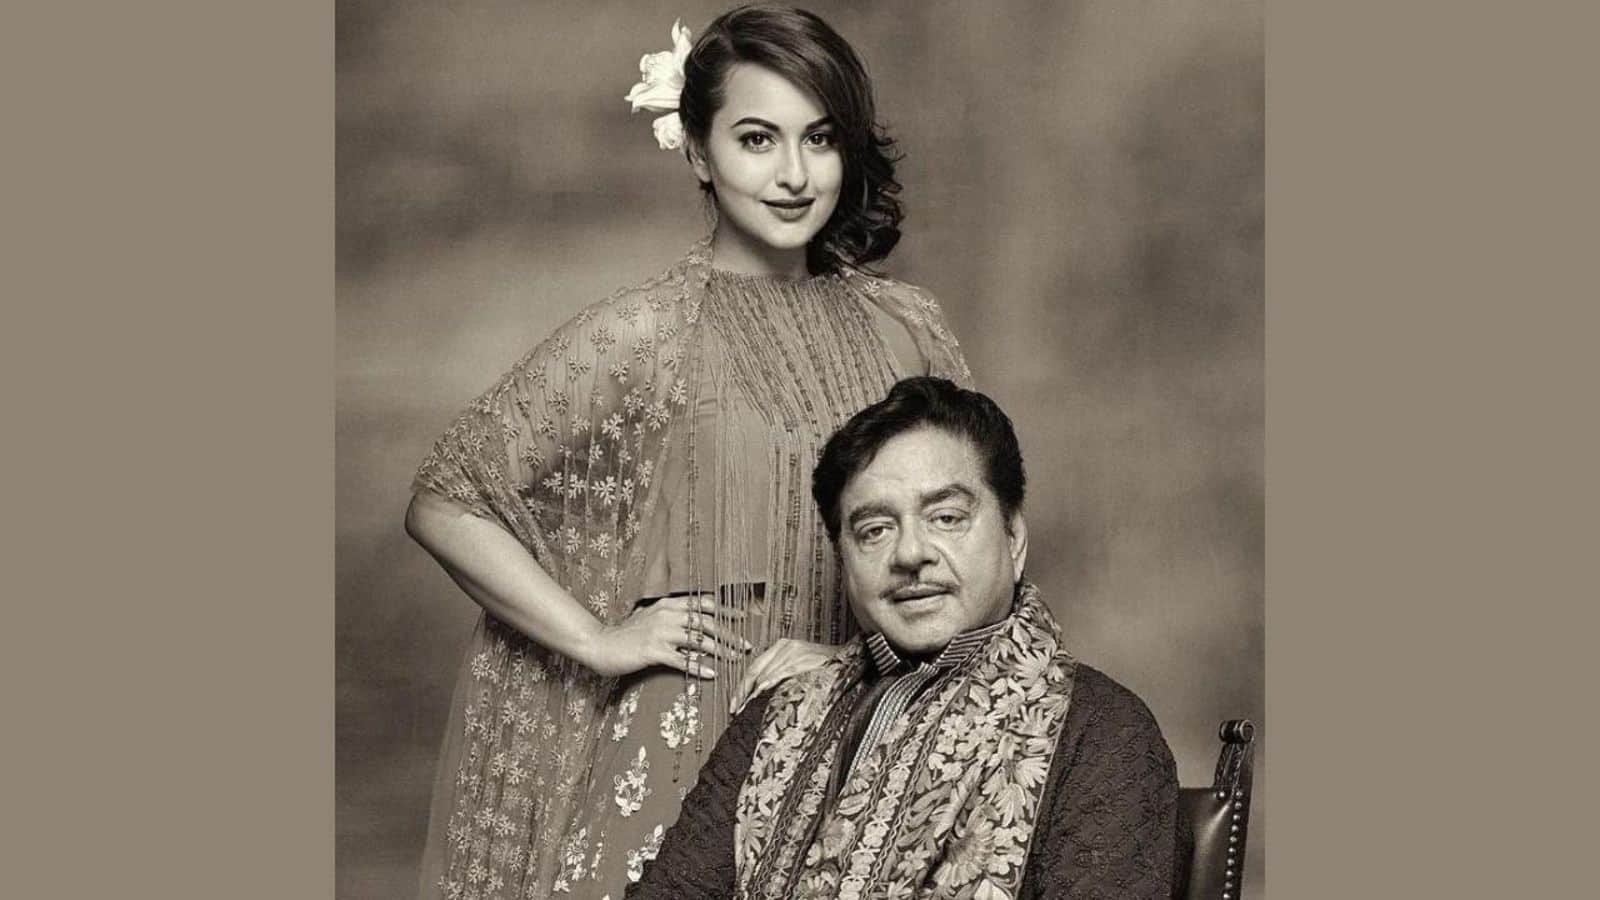 'I'll be there': Shatrughan Sinha confirms attendance at Sonakshi's wedding